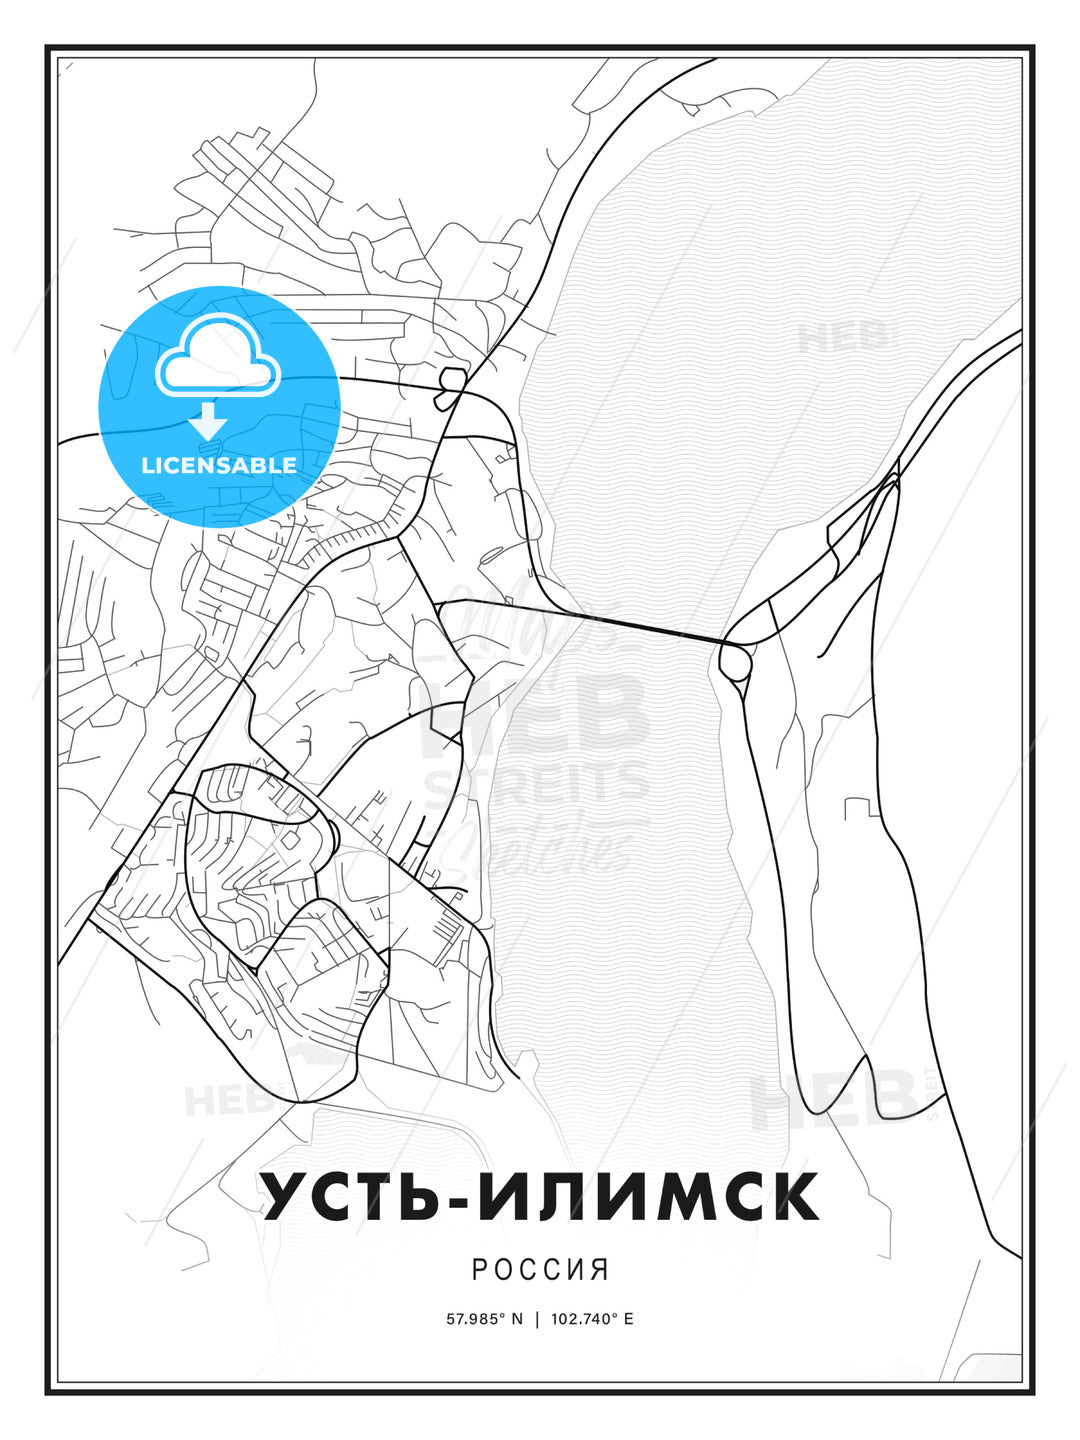 УСТЬ-ИЛИМСК / Ust-Ilimsk, Russia, Modern Print Template in Various Formats - HEBSTREITS Sketches